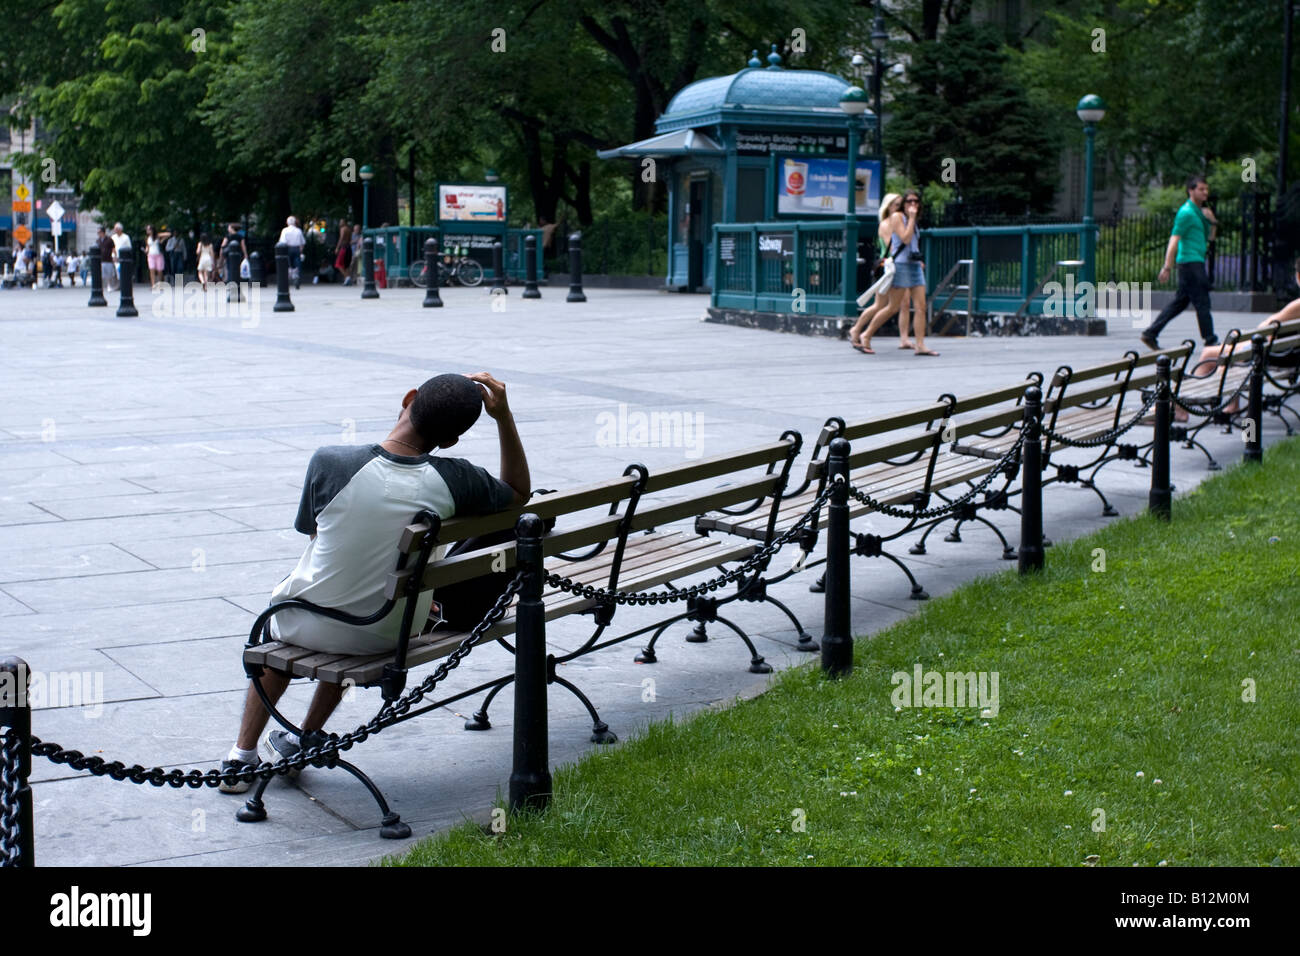 A man sitting on a bench outside the Chambers Street station in Manhattan, NY. Stock Photo